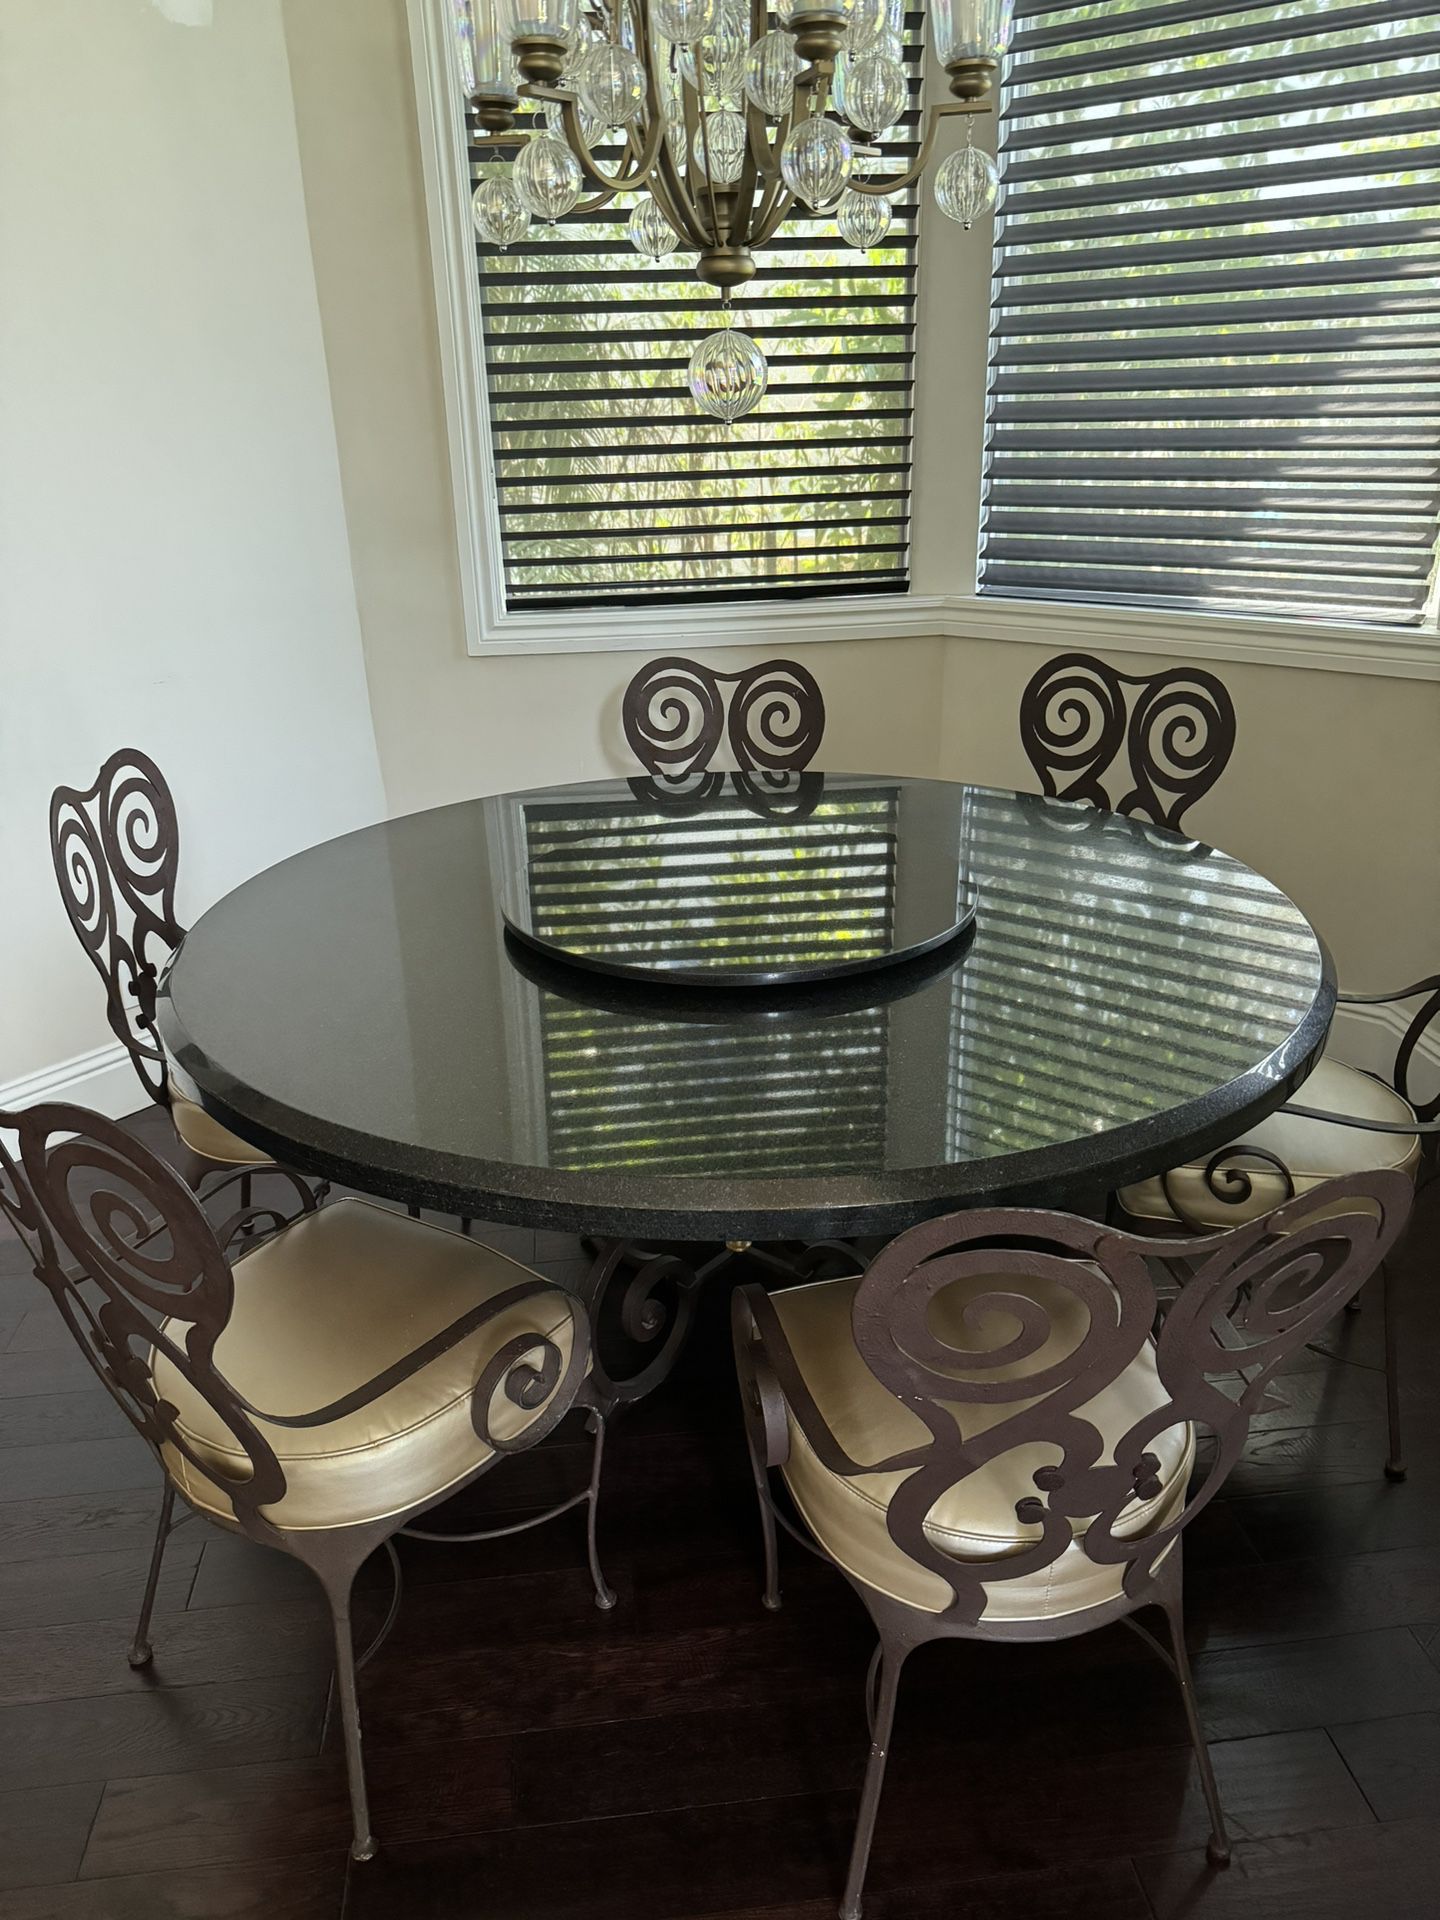 Custom Marble  Round Kitchen/Dining Room Table - 70” - Originally $6500.    Asking $1400